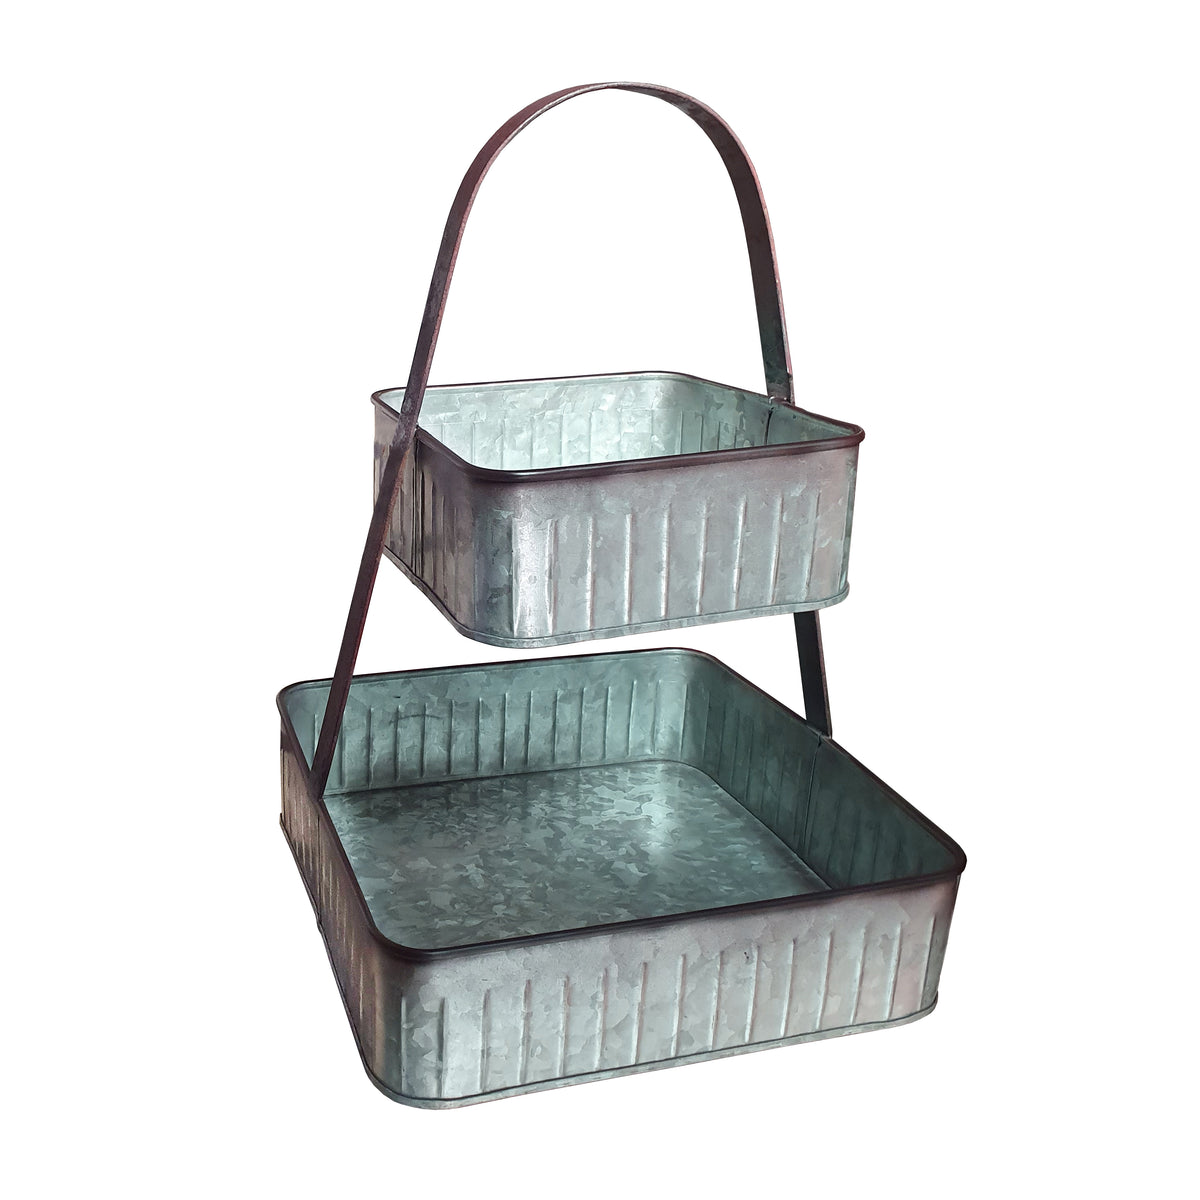 2 Tier Square Galvanized Metal Corrugated Tray with Arched Handle, Gray - BM195137